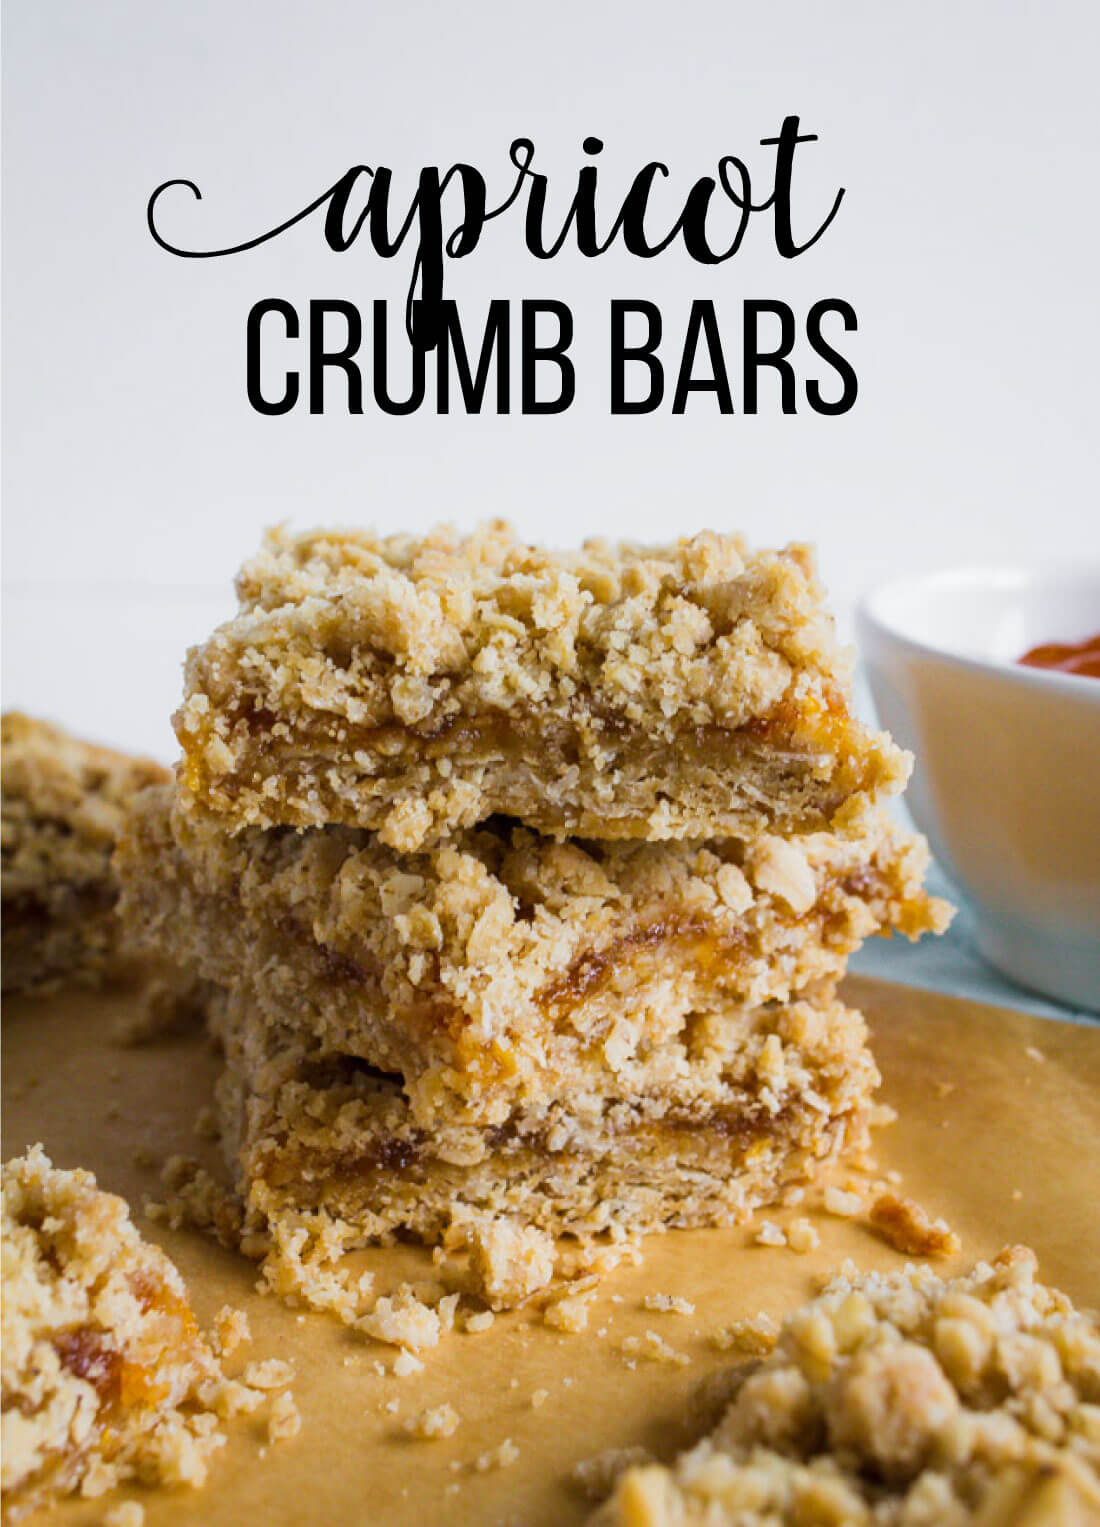 Apricot Crumb Bars - simple to make and oh so tasty from www.thirtyhandmadedays.com